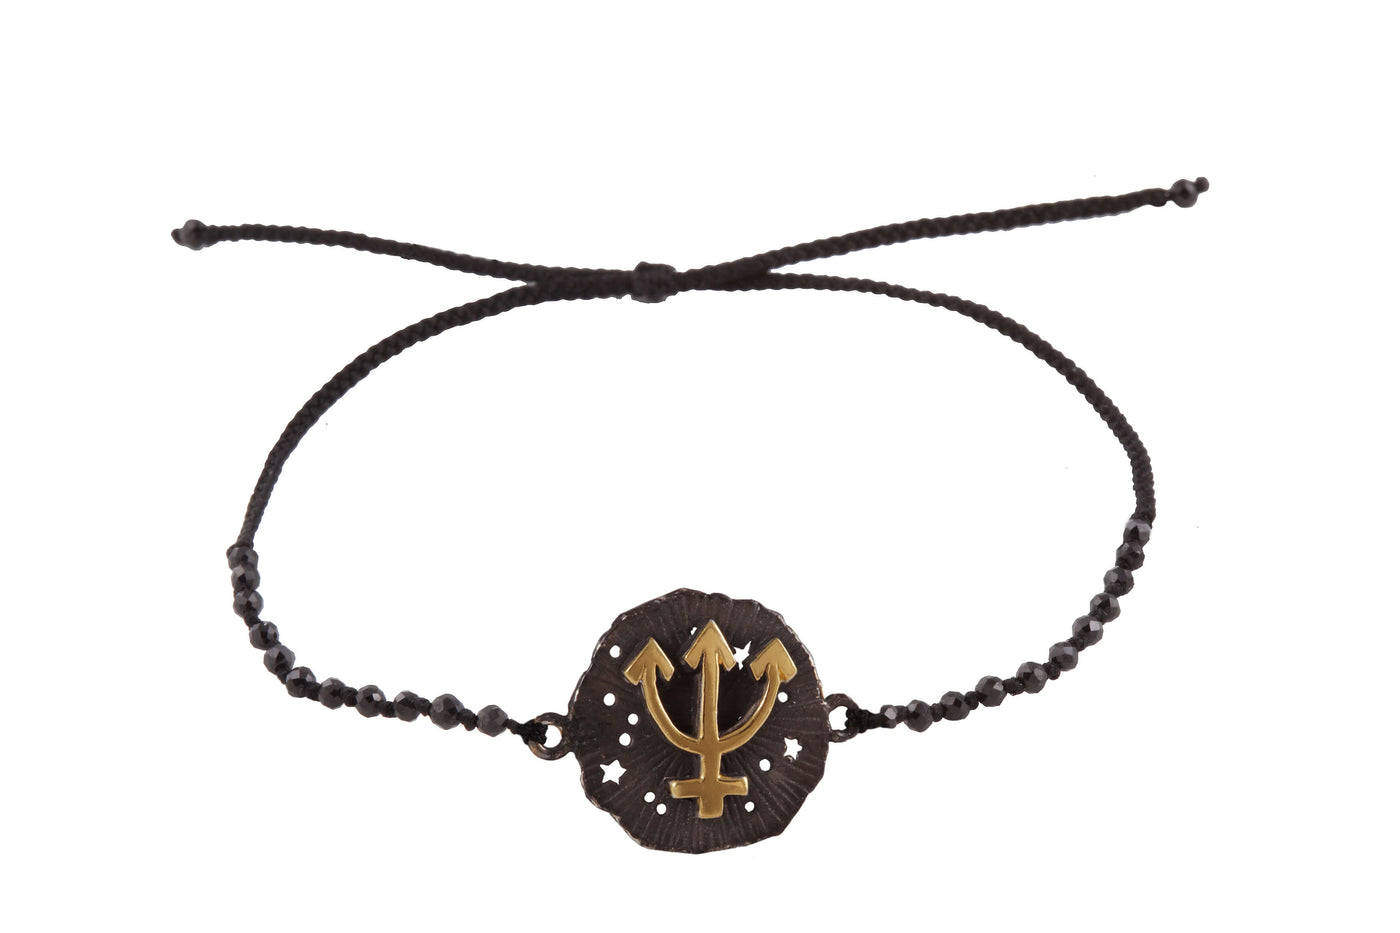 Neptune Medallion Amulet bracelet with beads. Gold plated and oxide